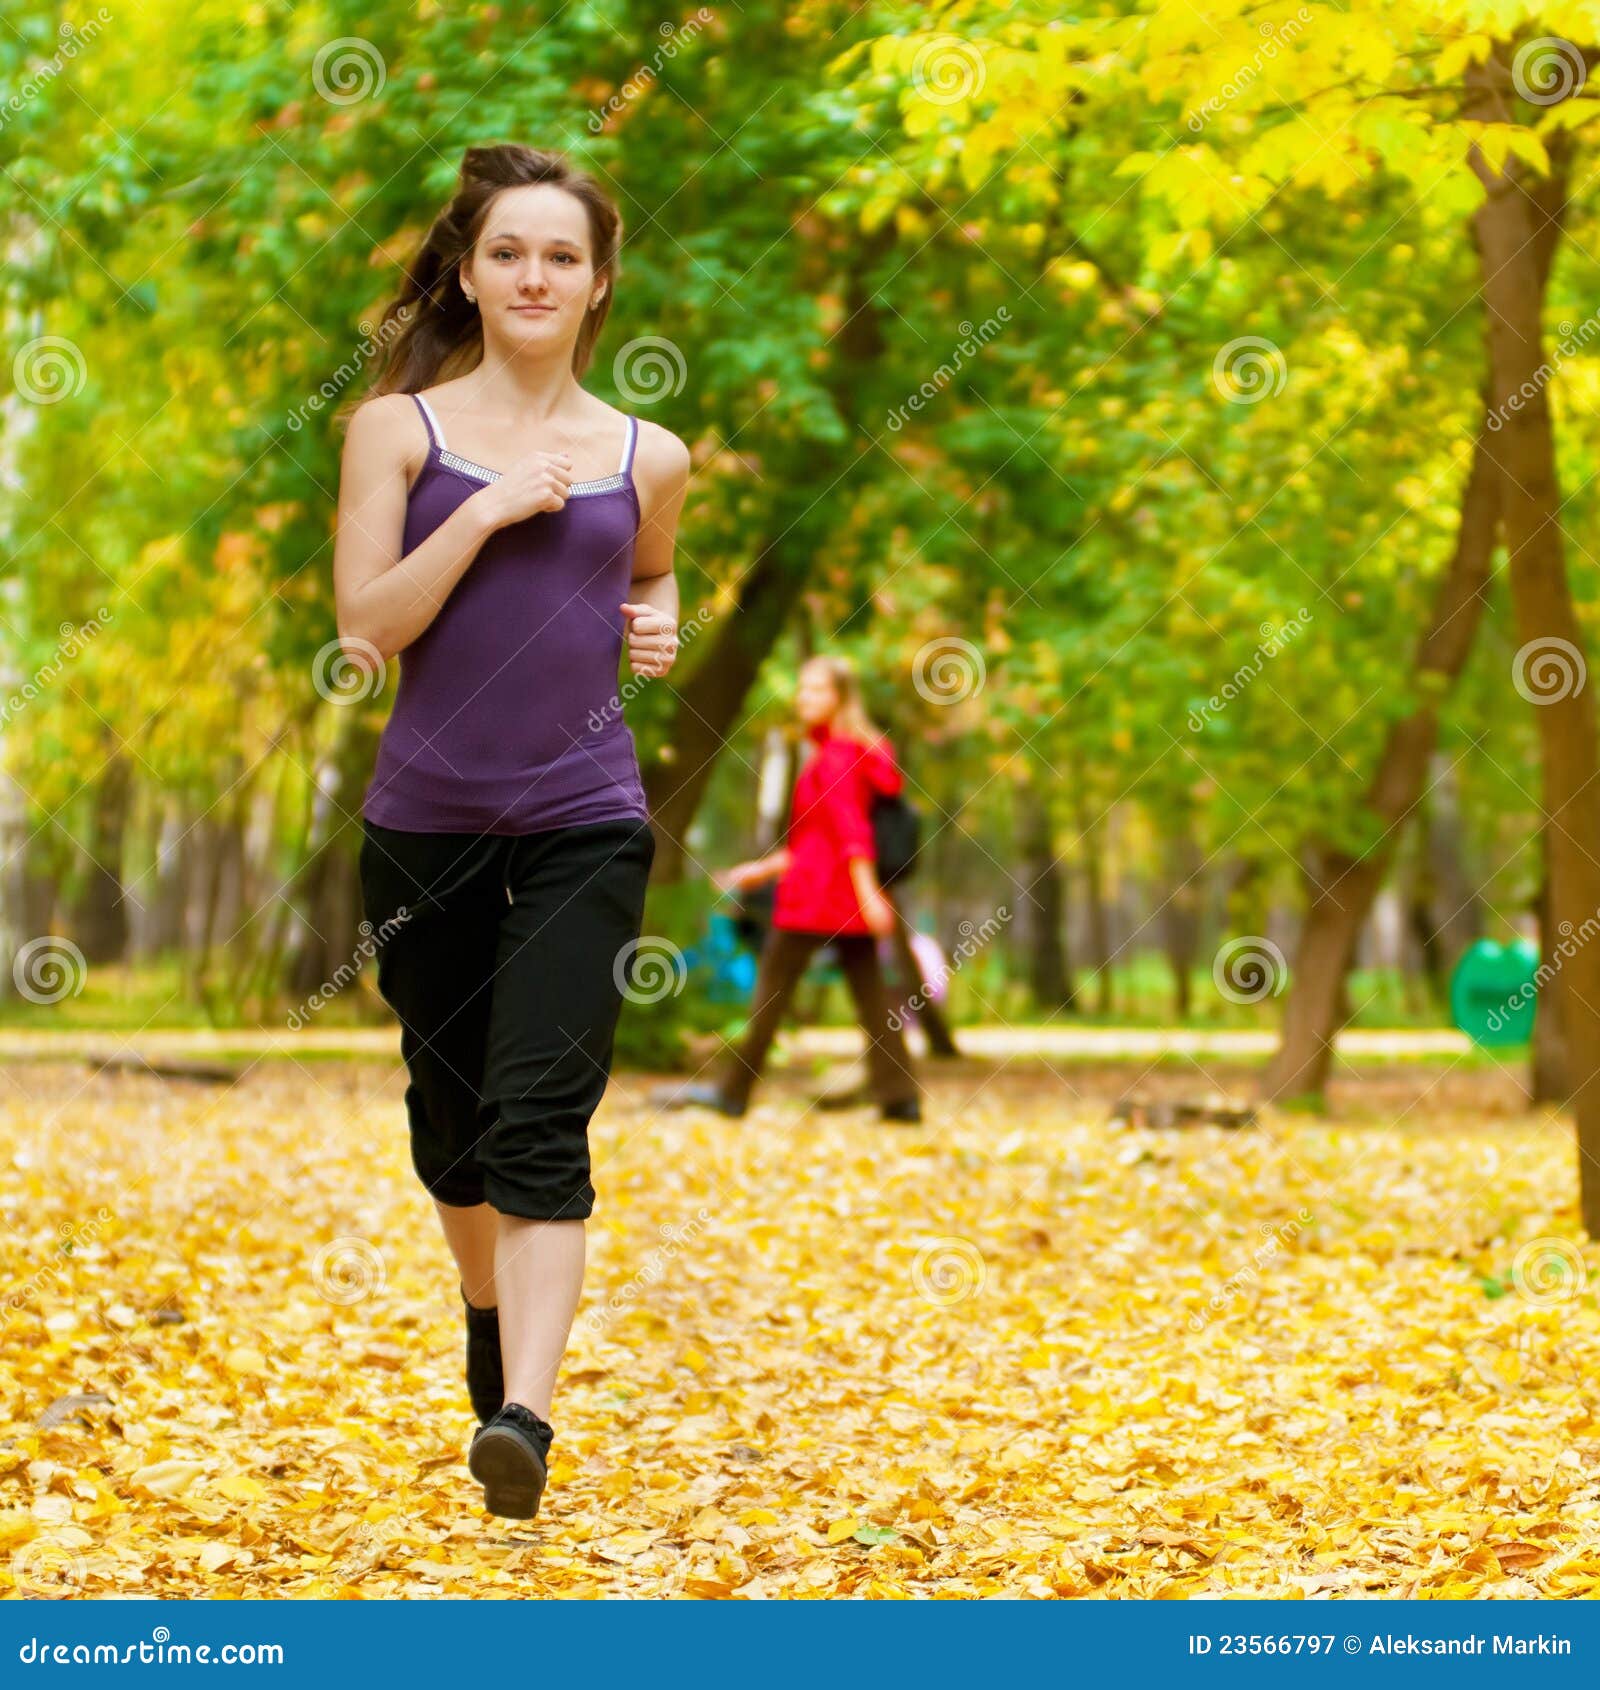 A Young Girl Running in Autumn Park Stock Image - Image of motion ...